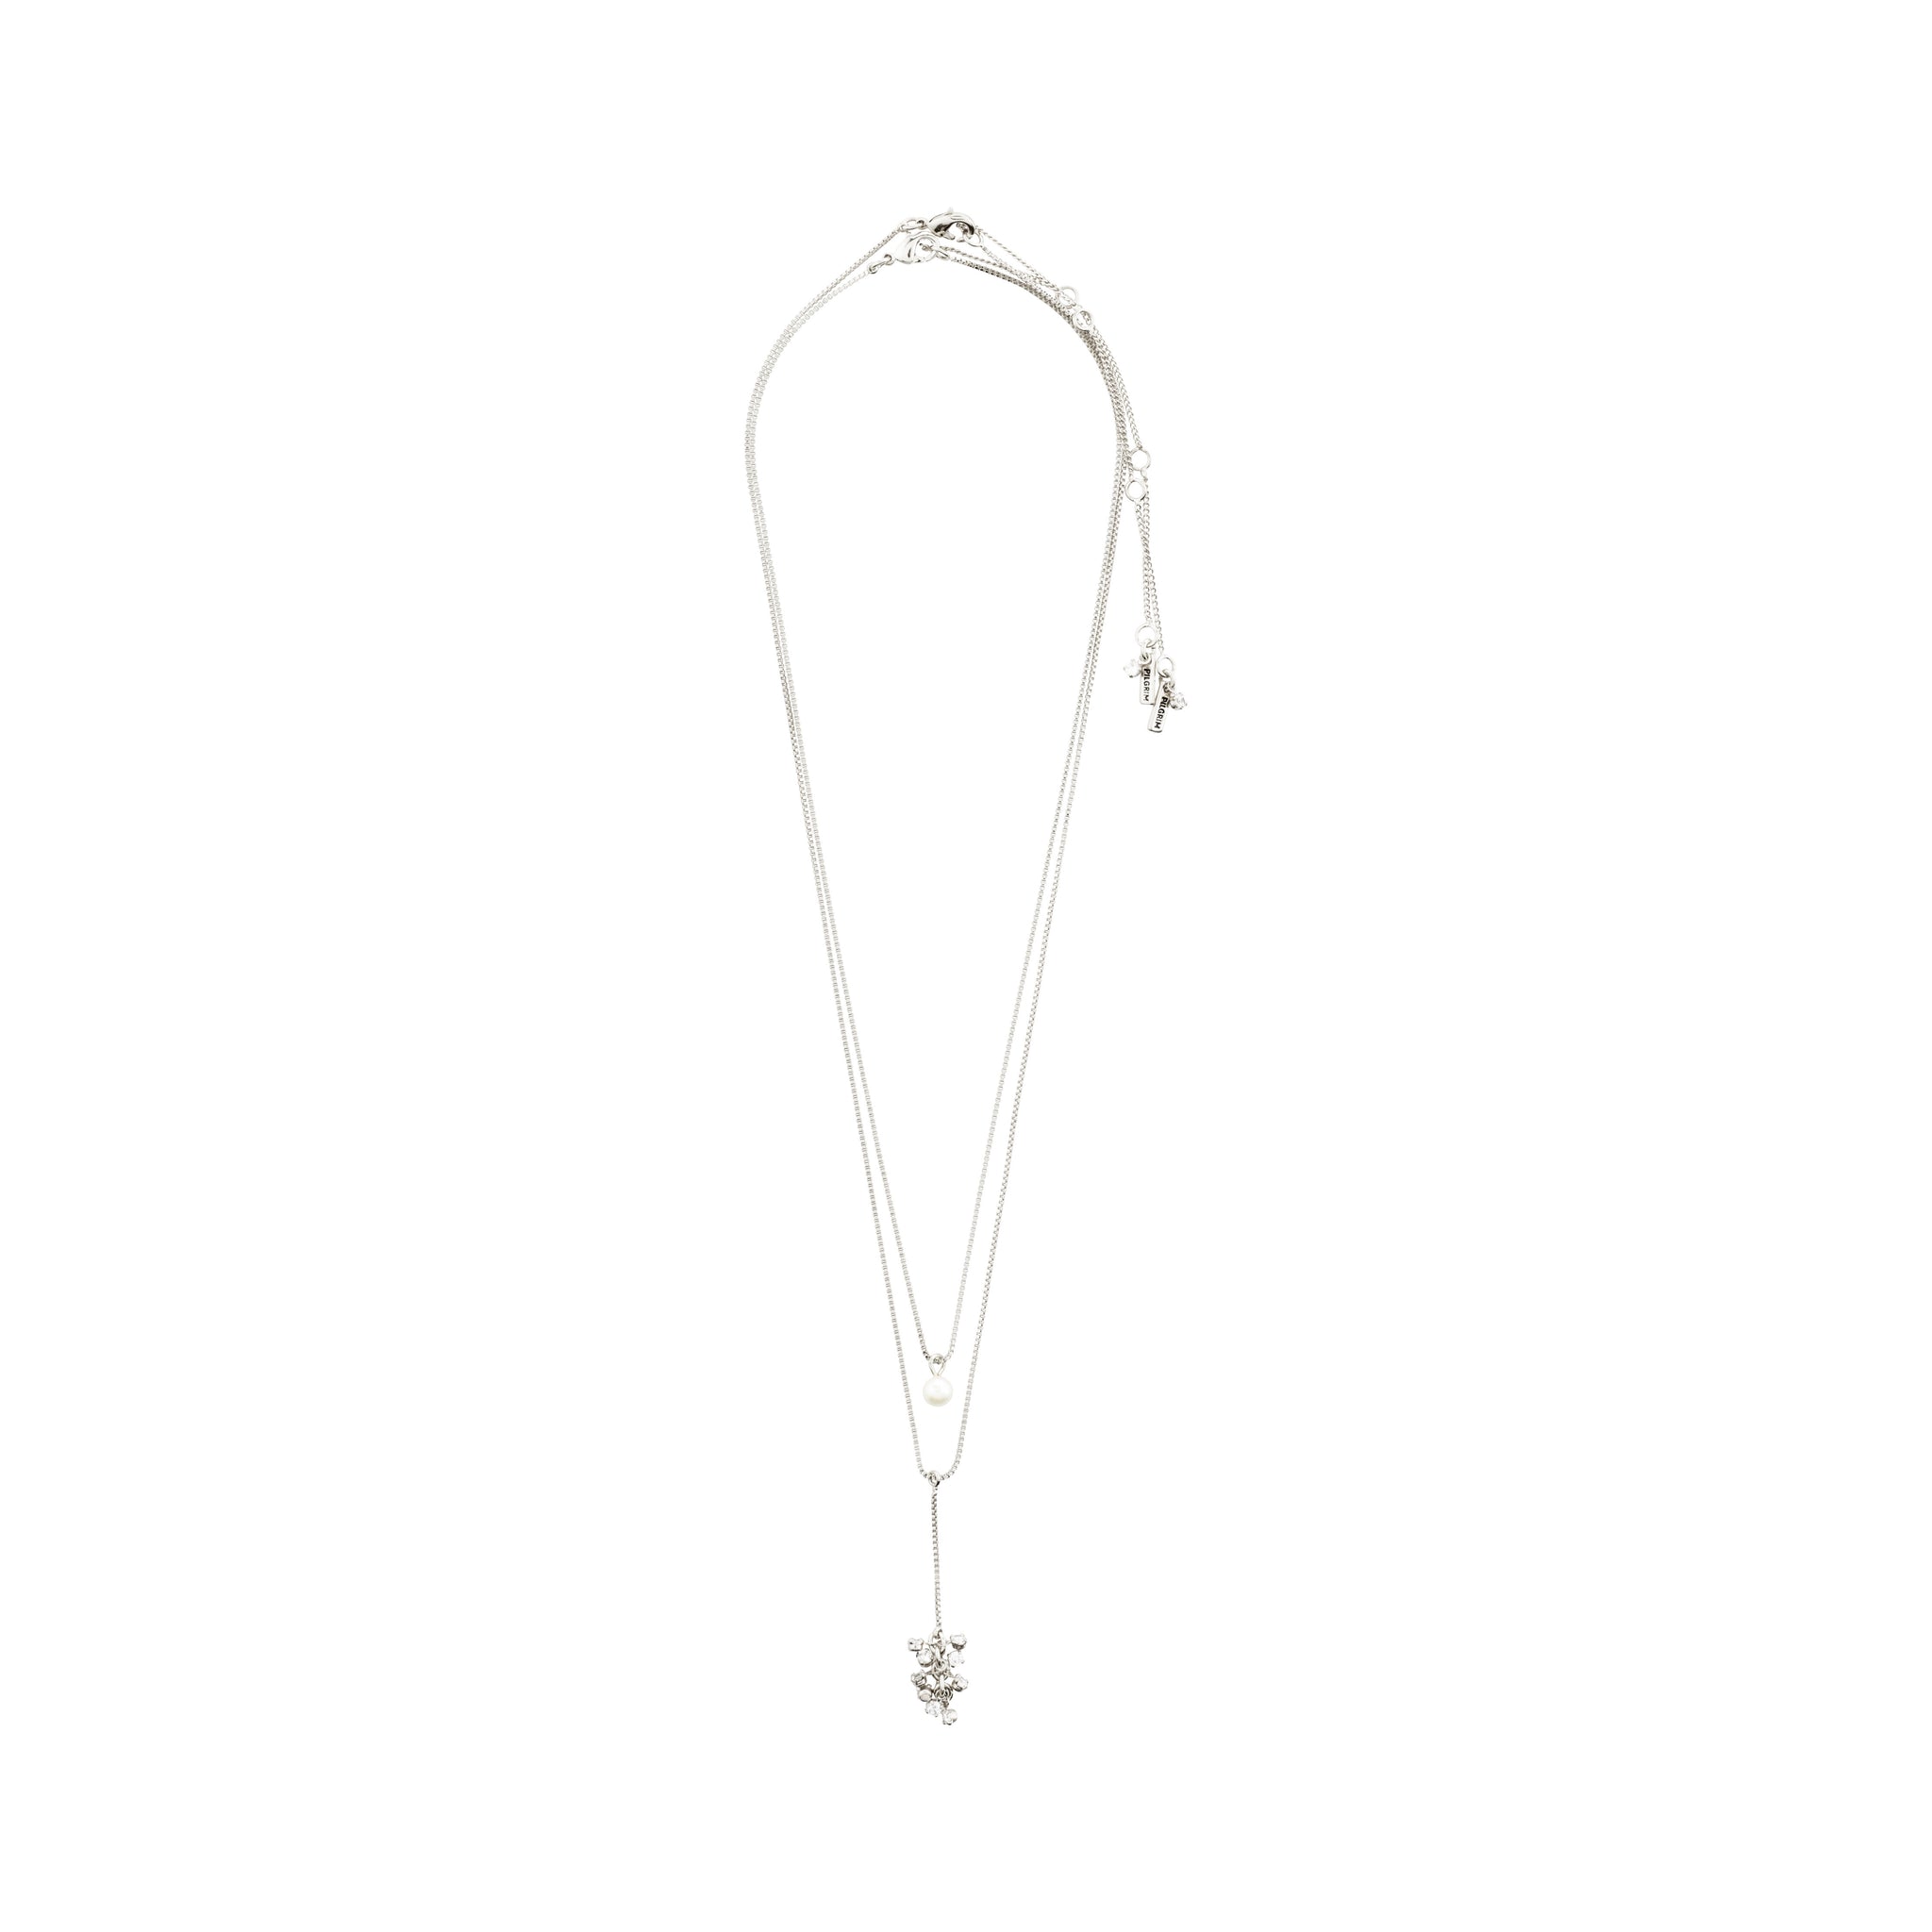 Jolene Necklace - Silver Plated